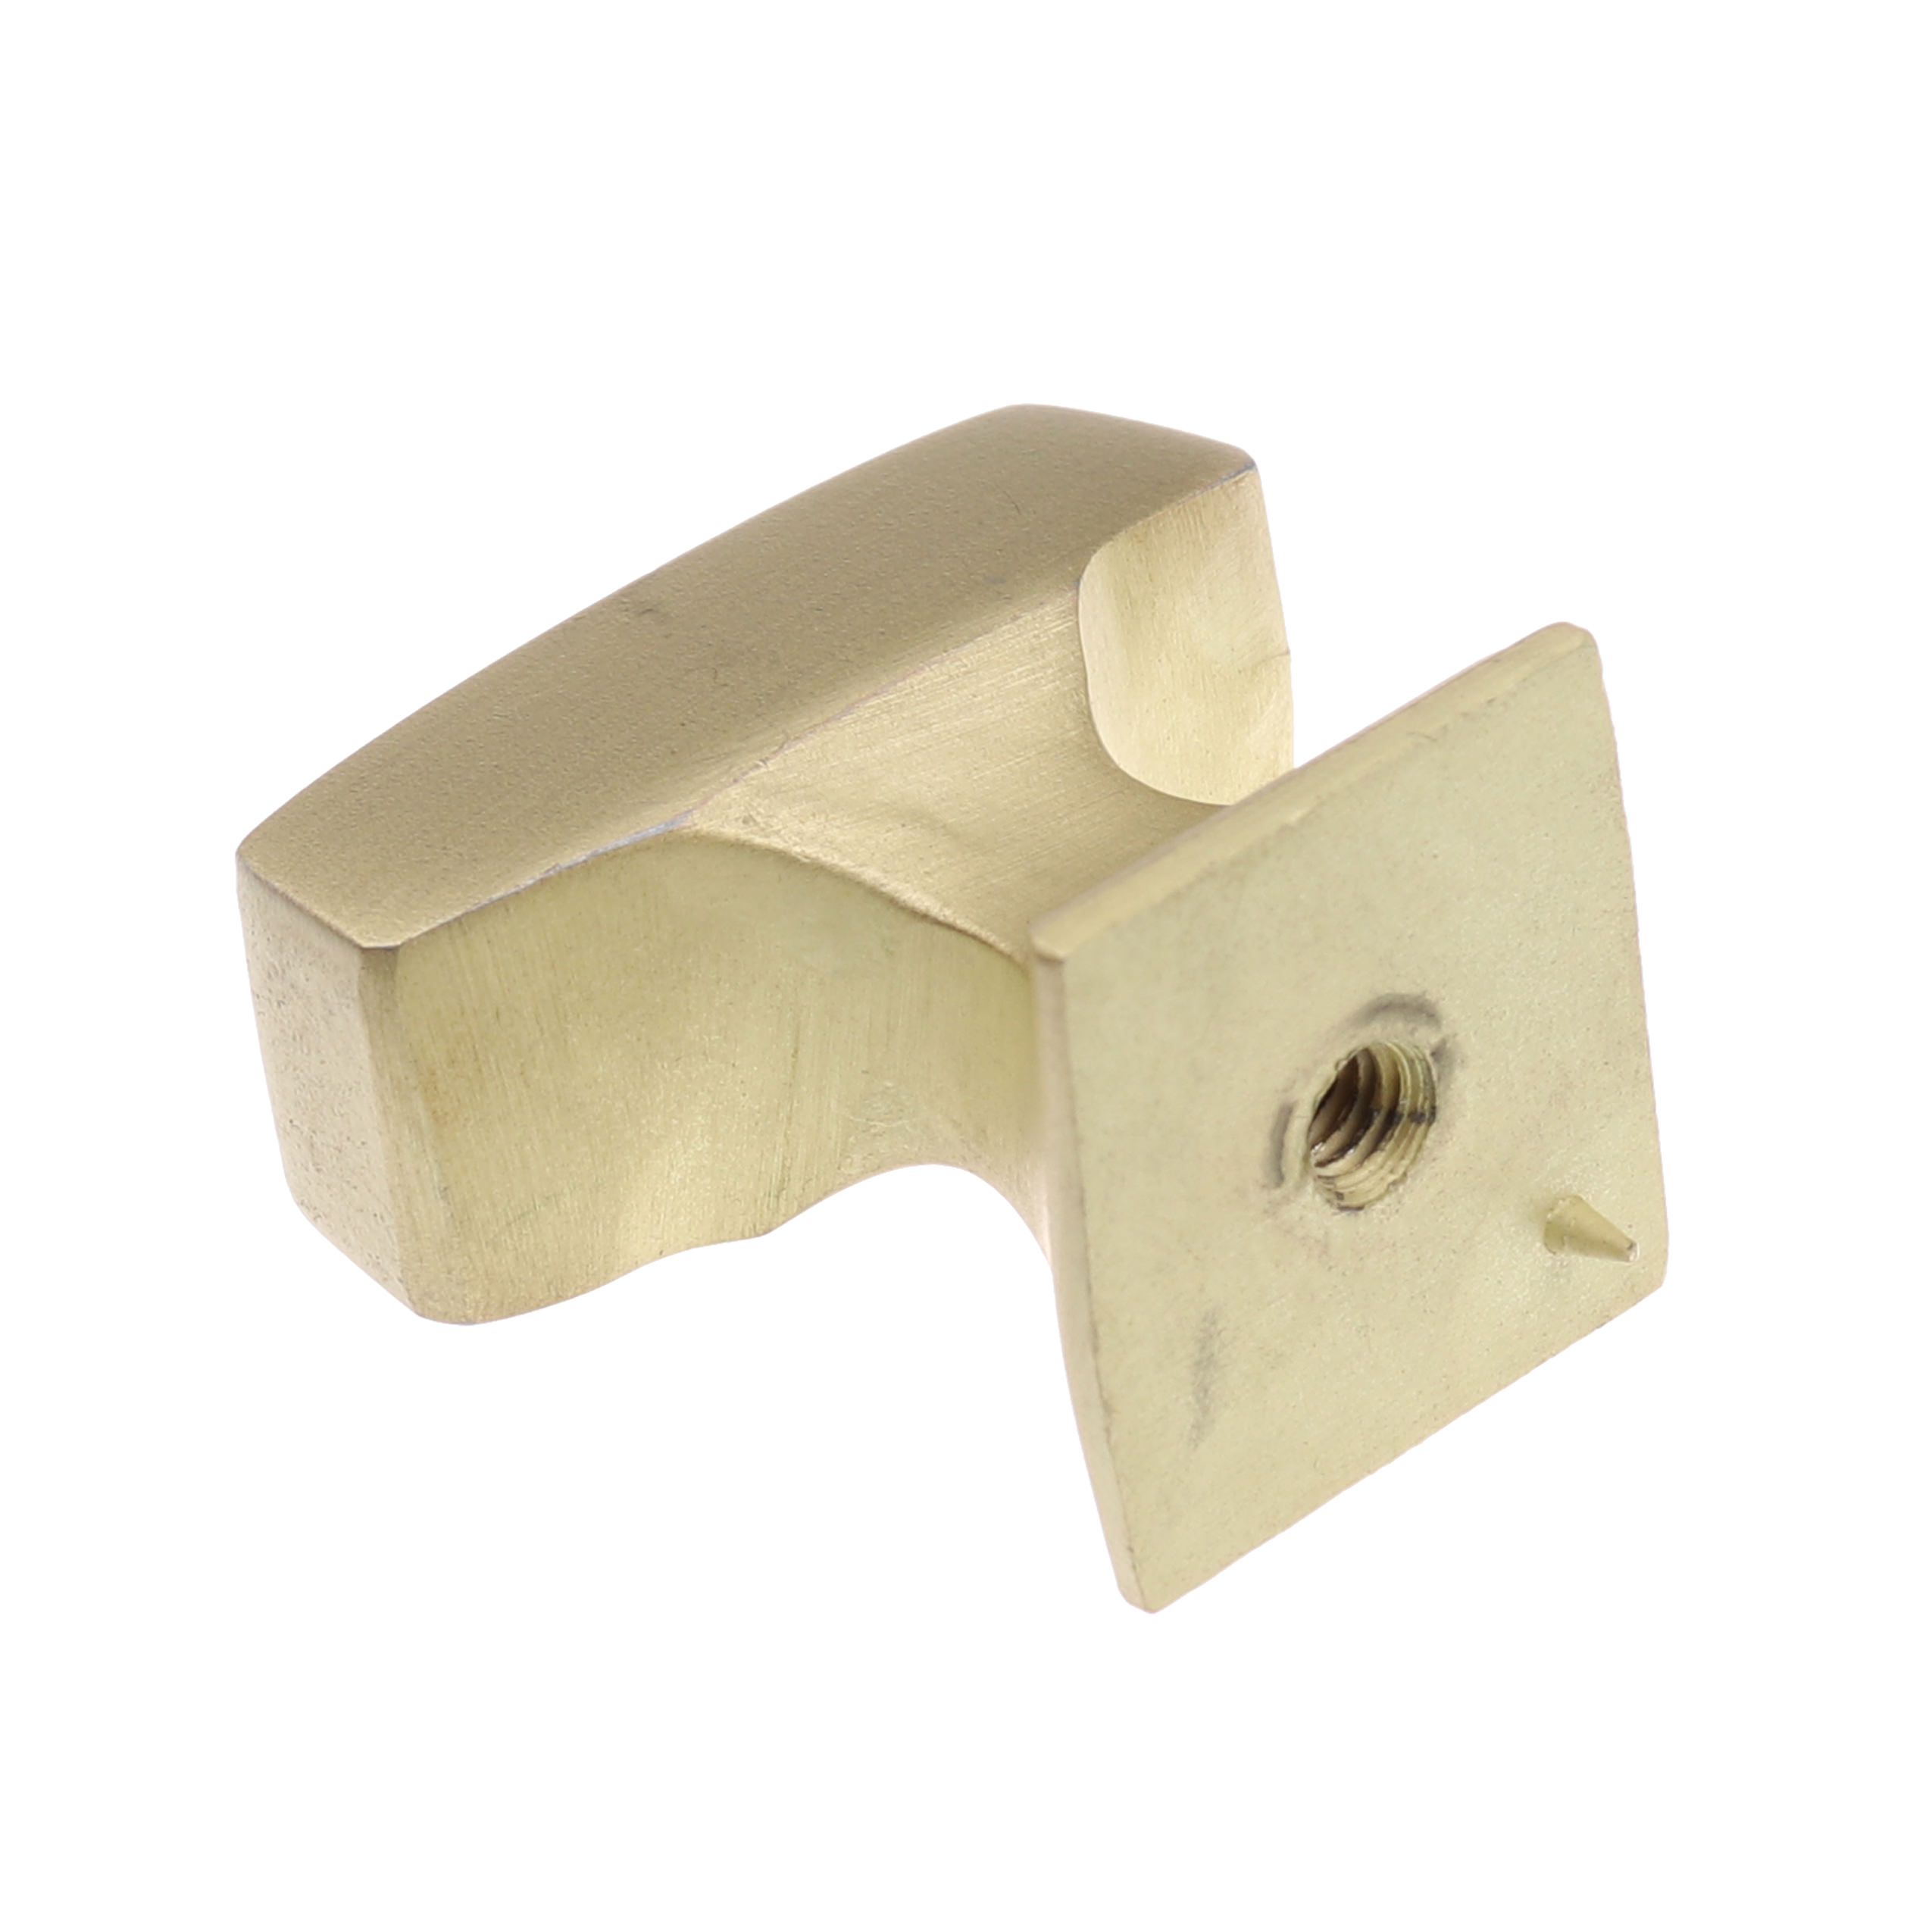 GlideRite 1-1/8 in. Transition Style Rectangle Cabinet Knob, Satin Gold, Pack of 10 - image 5 of 5